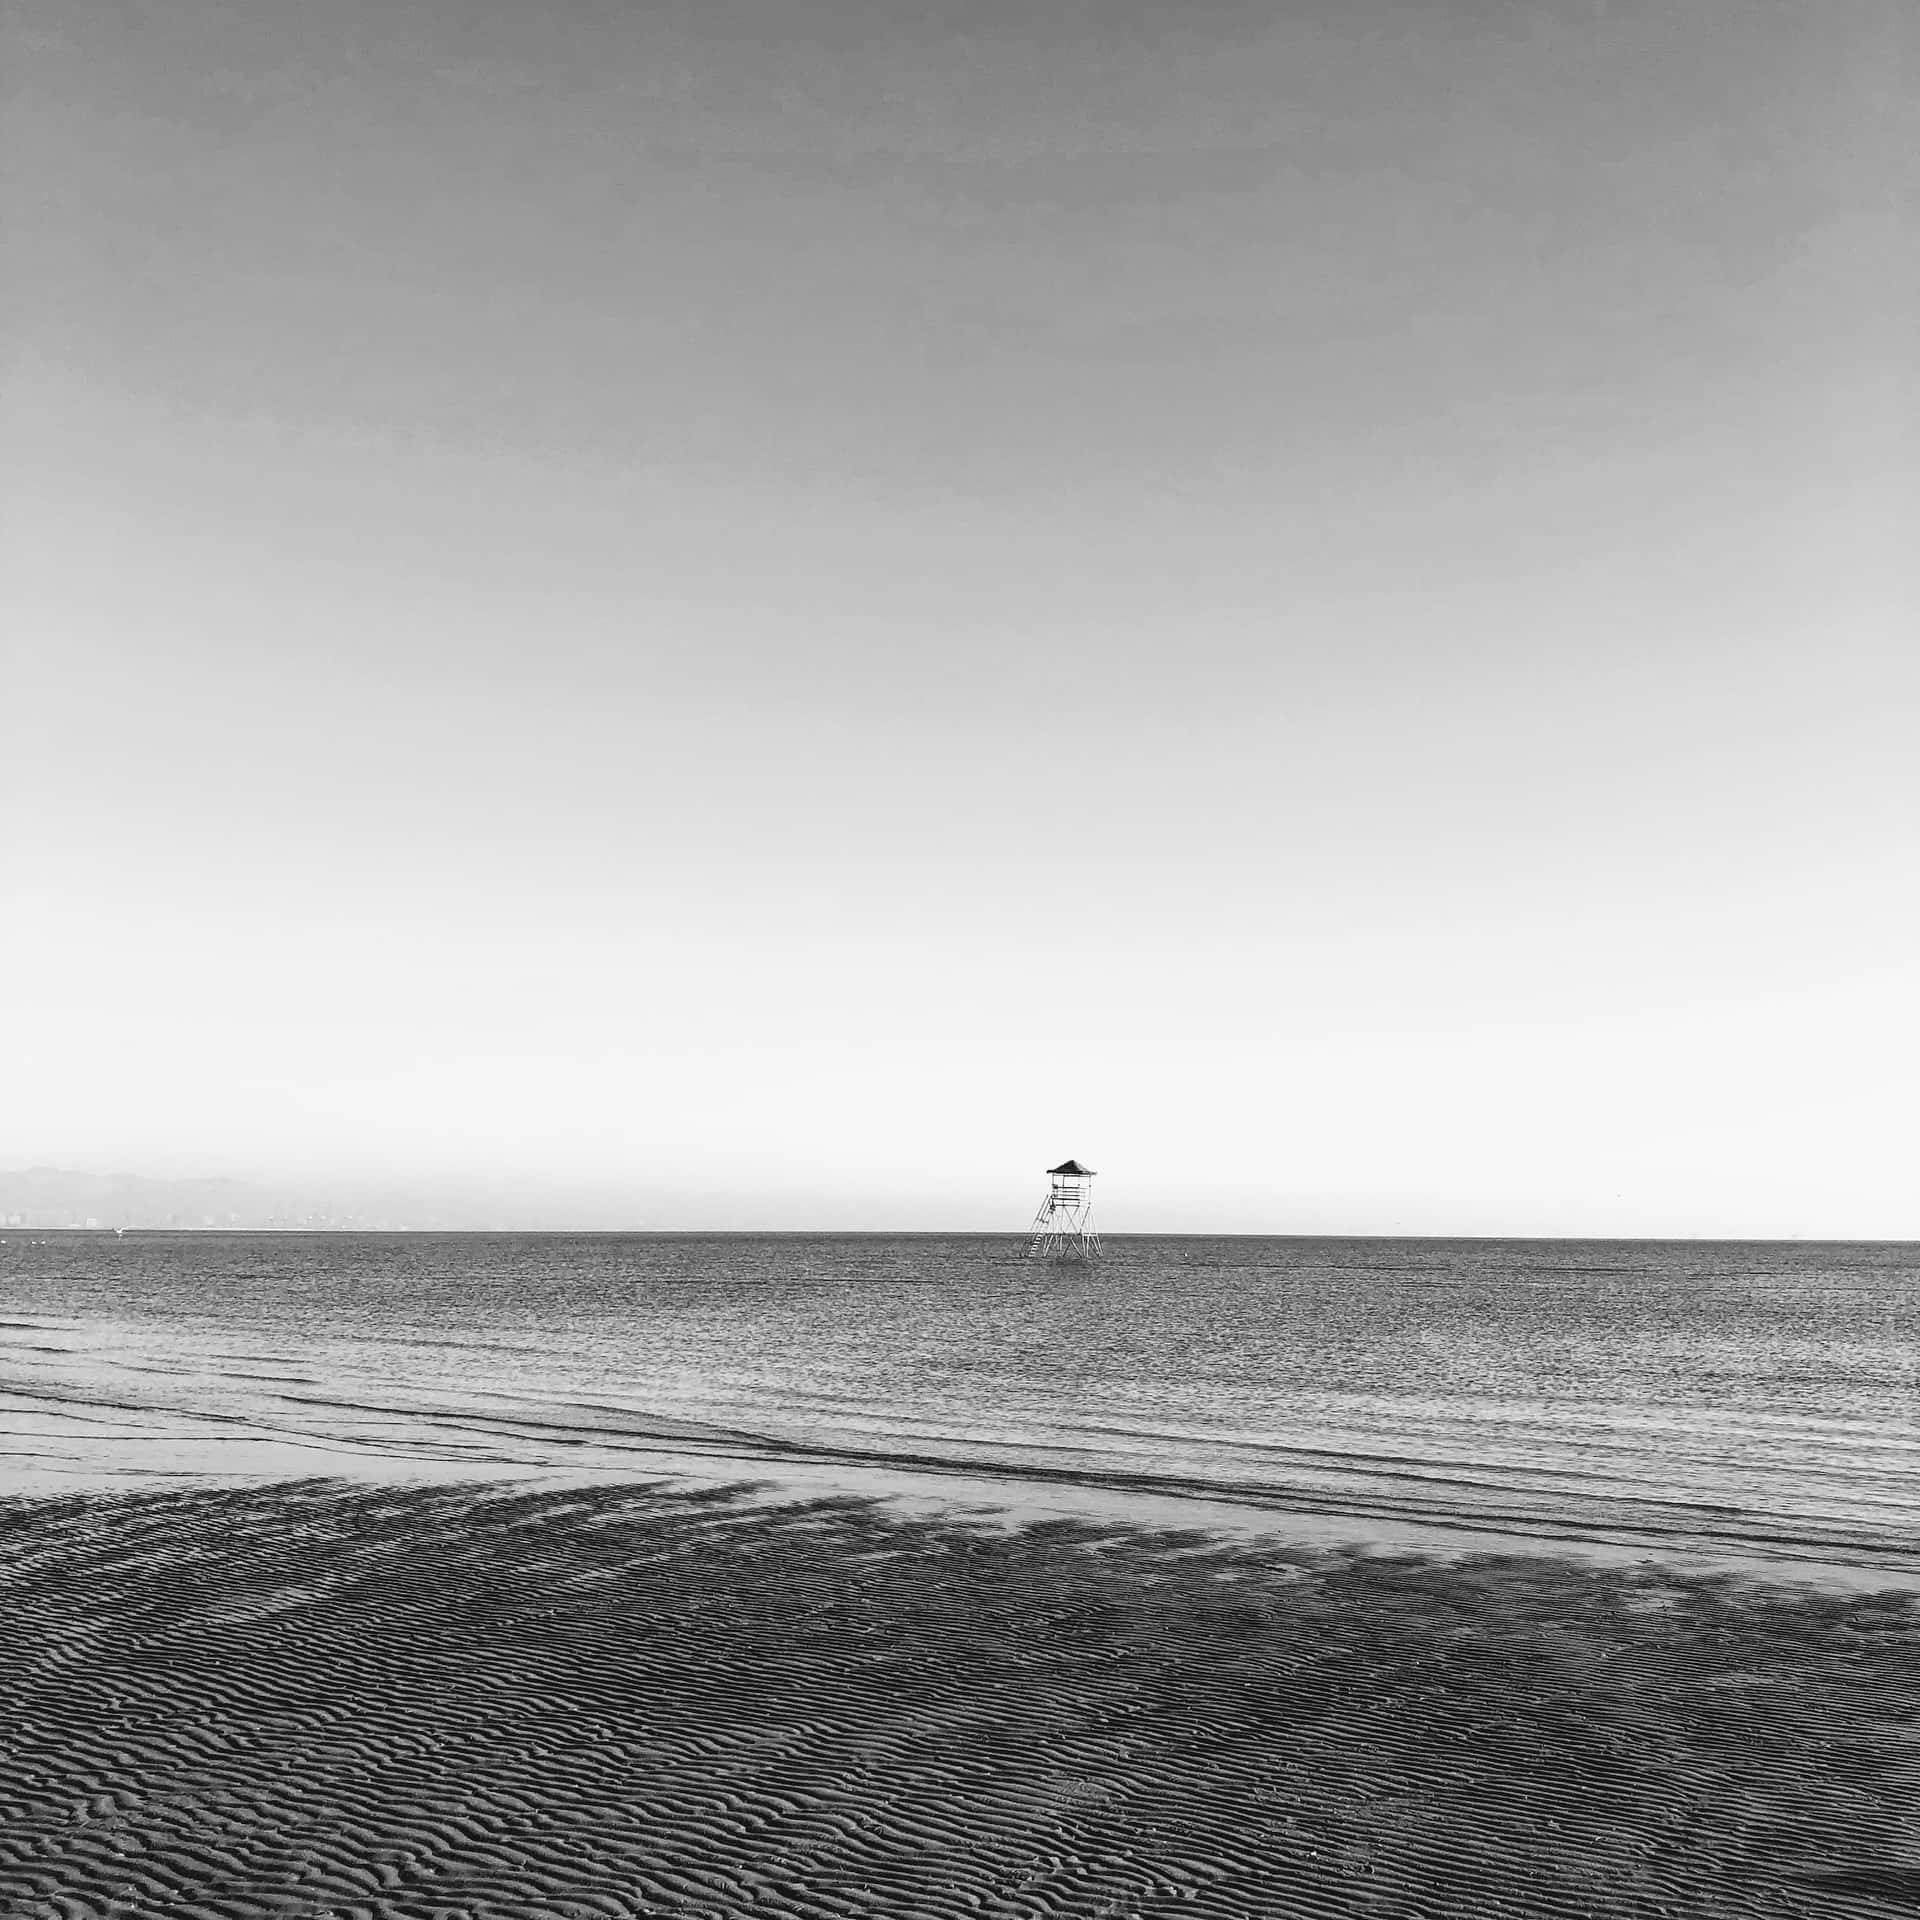 Download Serene Black and White Beach Landscape Wallpaper | Wallpapers.com